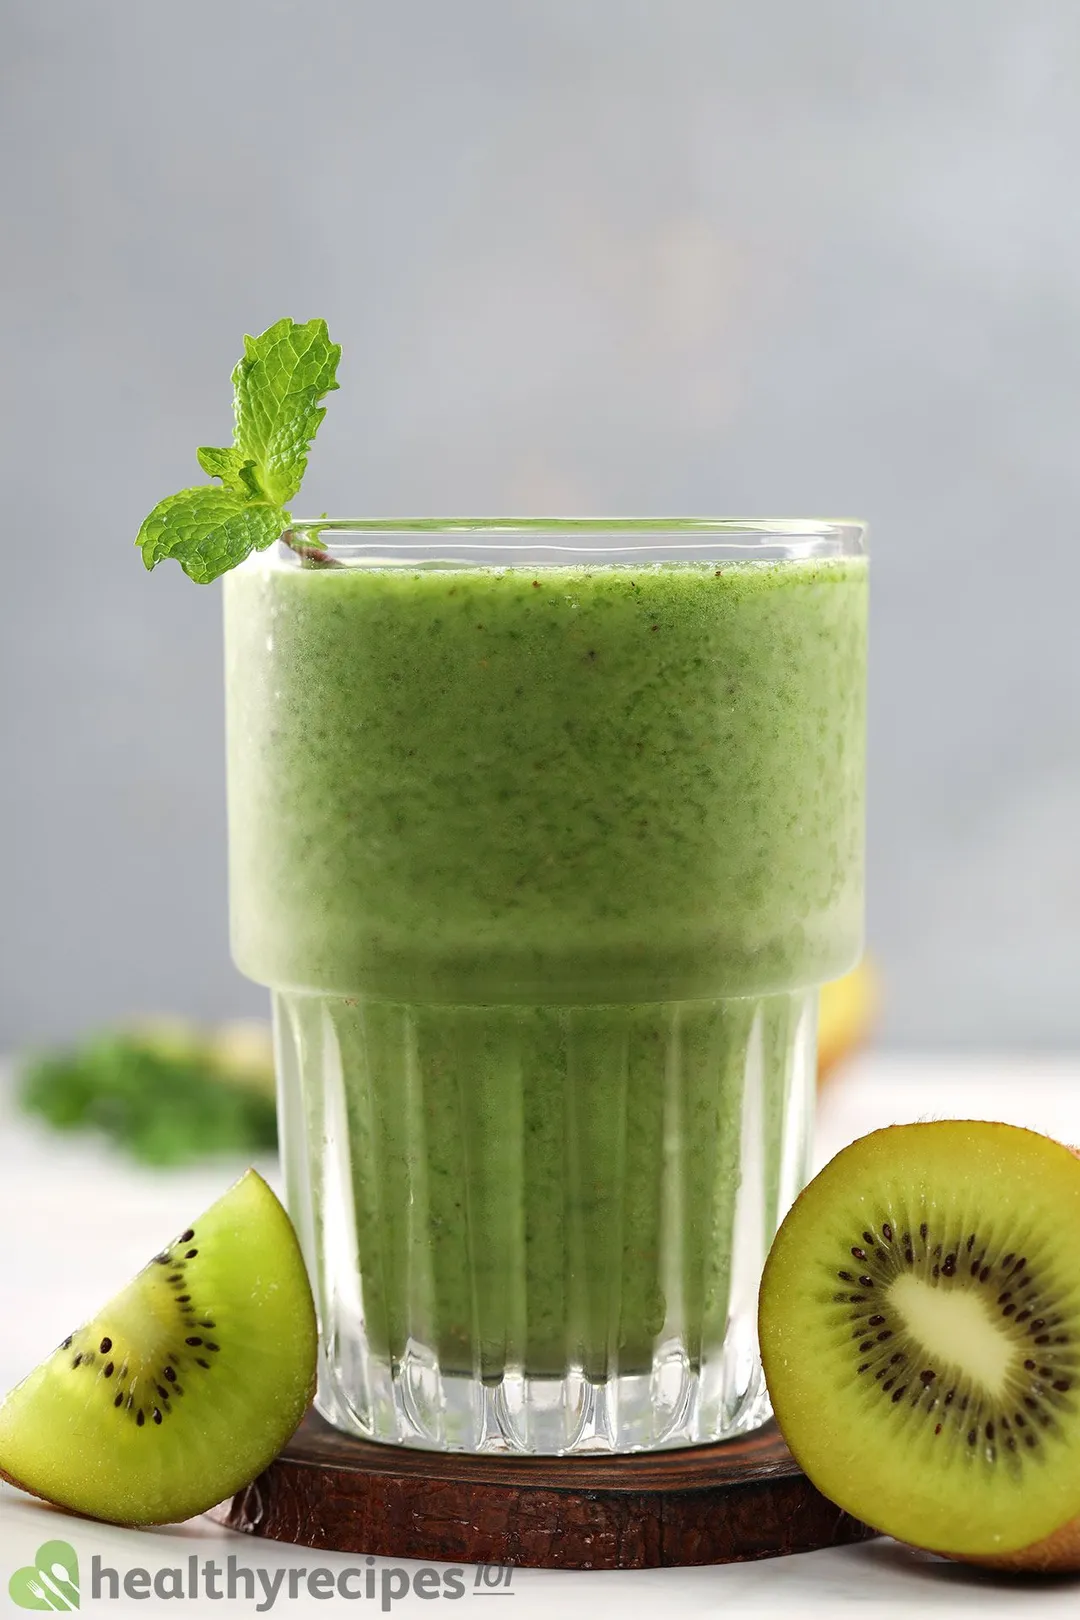 A green glass of apple kiwi kale smoothie placed on a wooden coaster and near sliced kiwis.